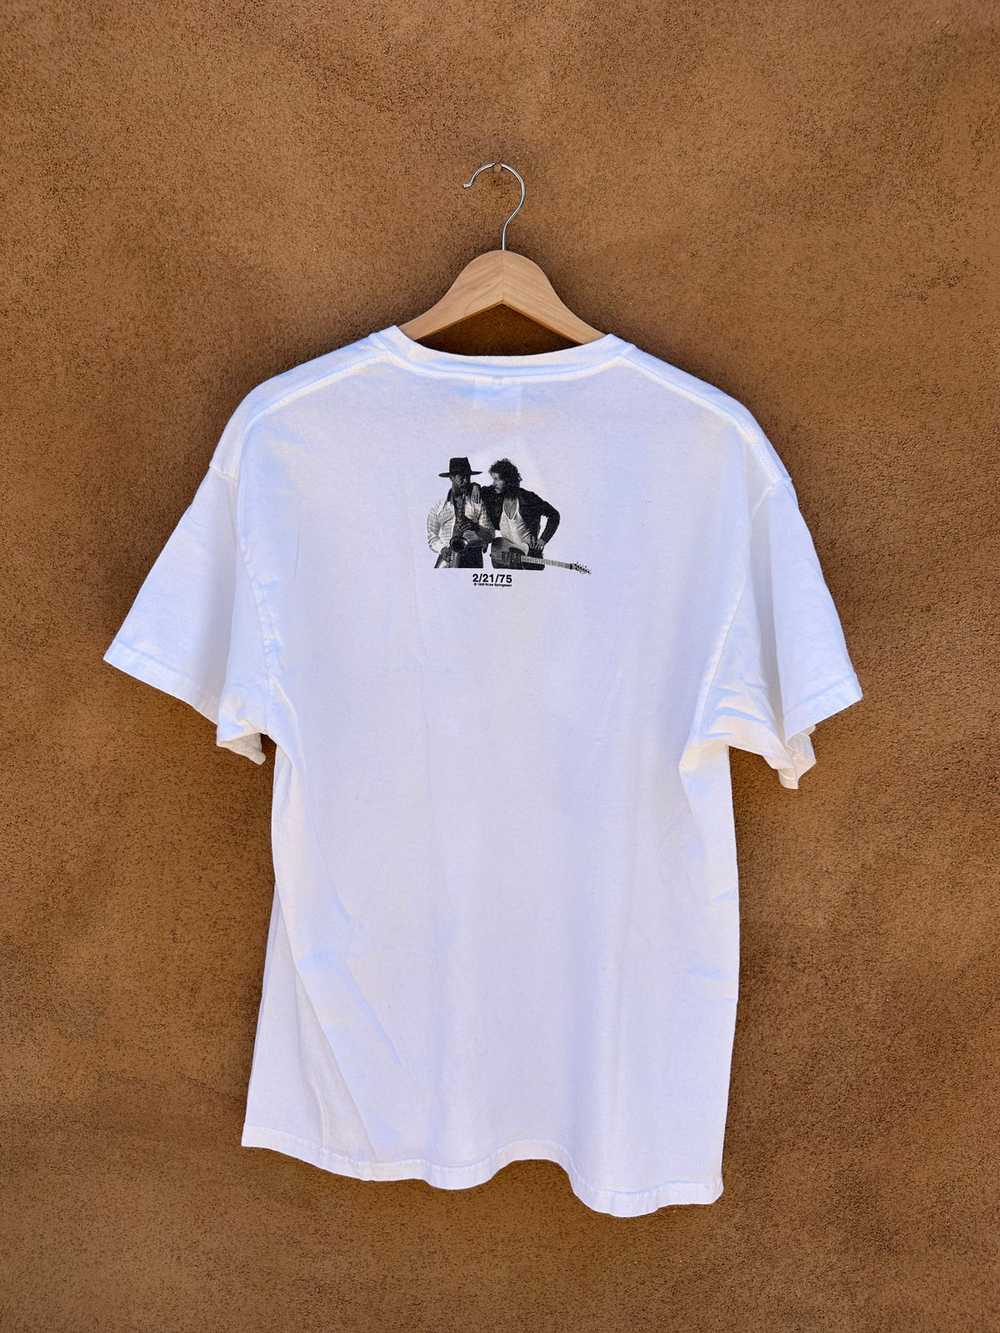 Bruce Springsteen Born to Run 1999 Re-issue Tee - image 2